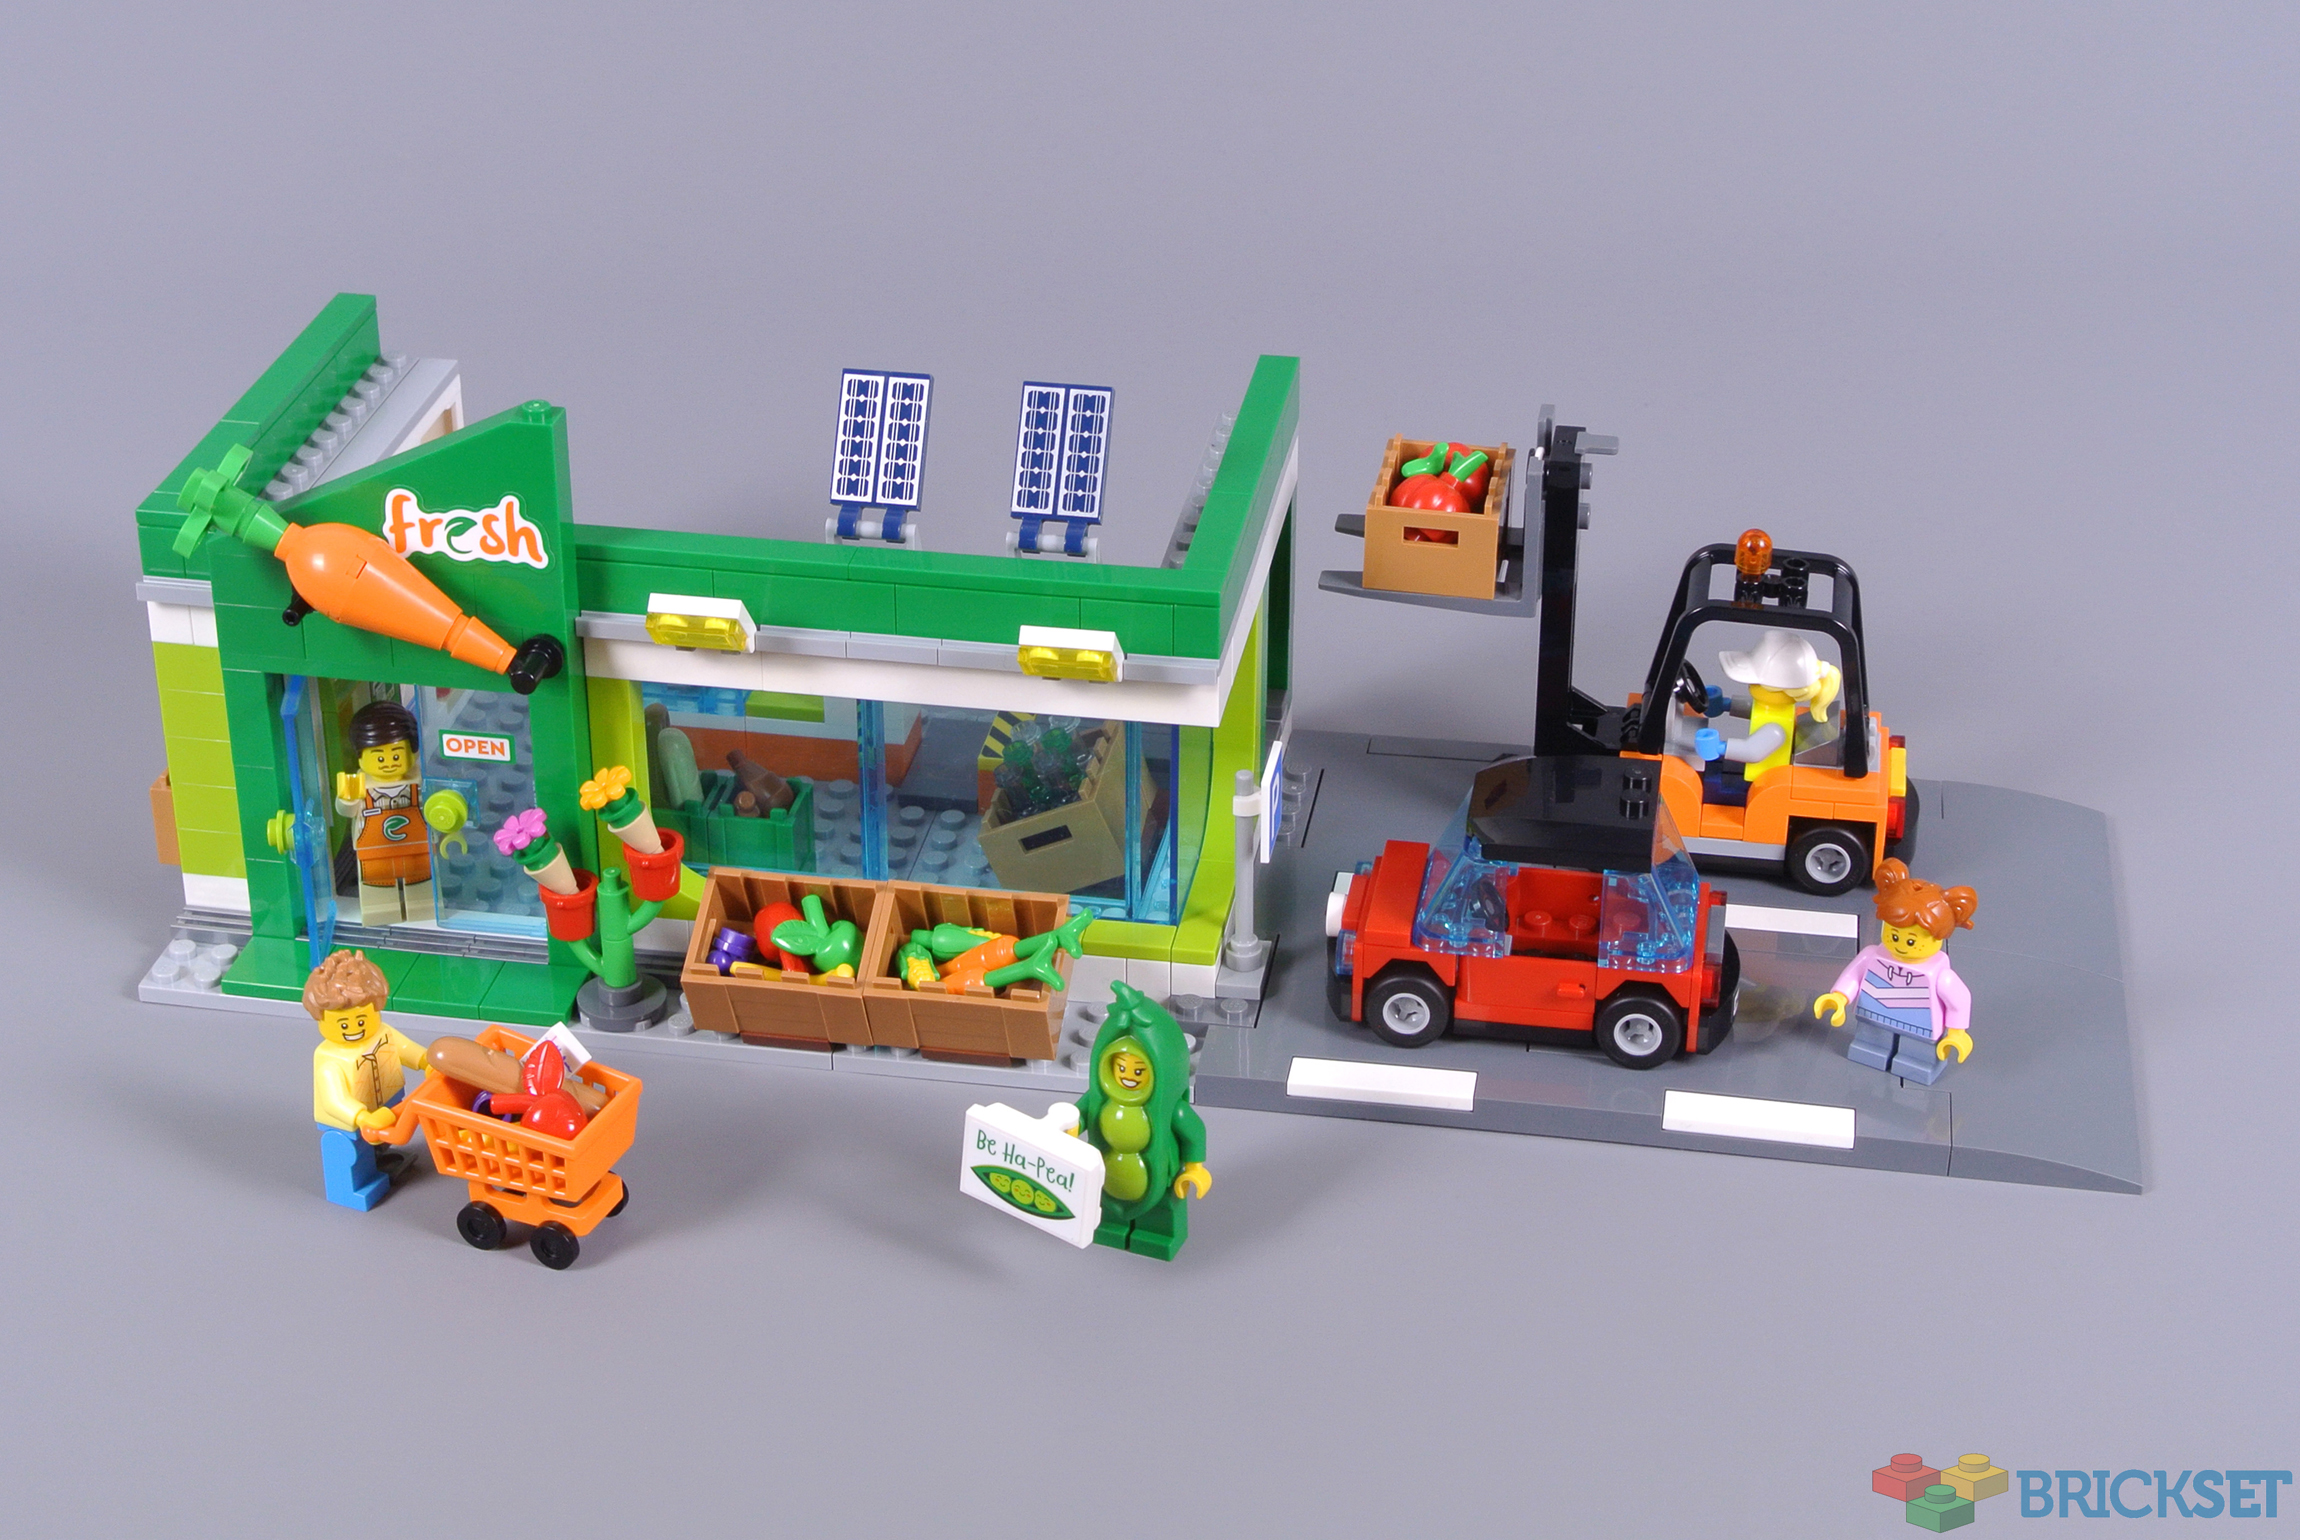 LEGO 60347 Grocery Store review | Brickset